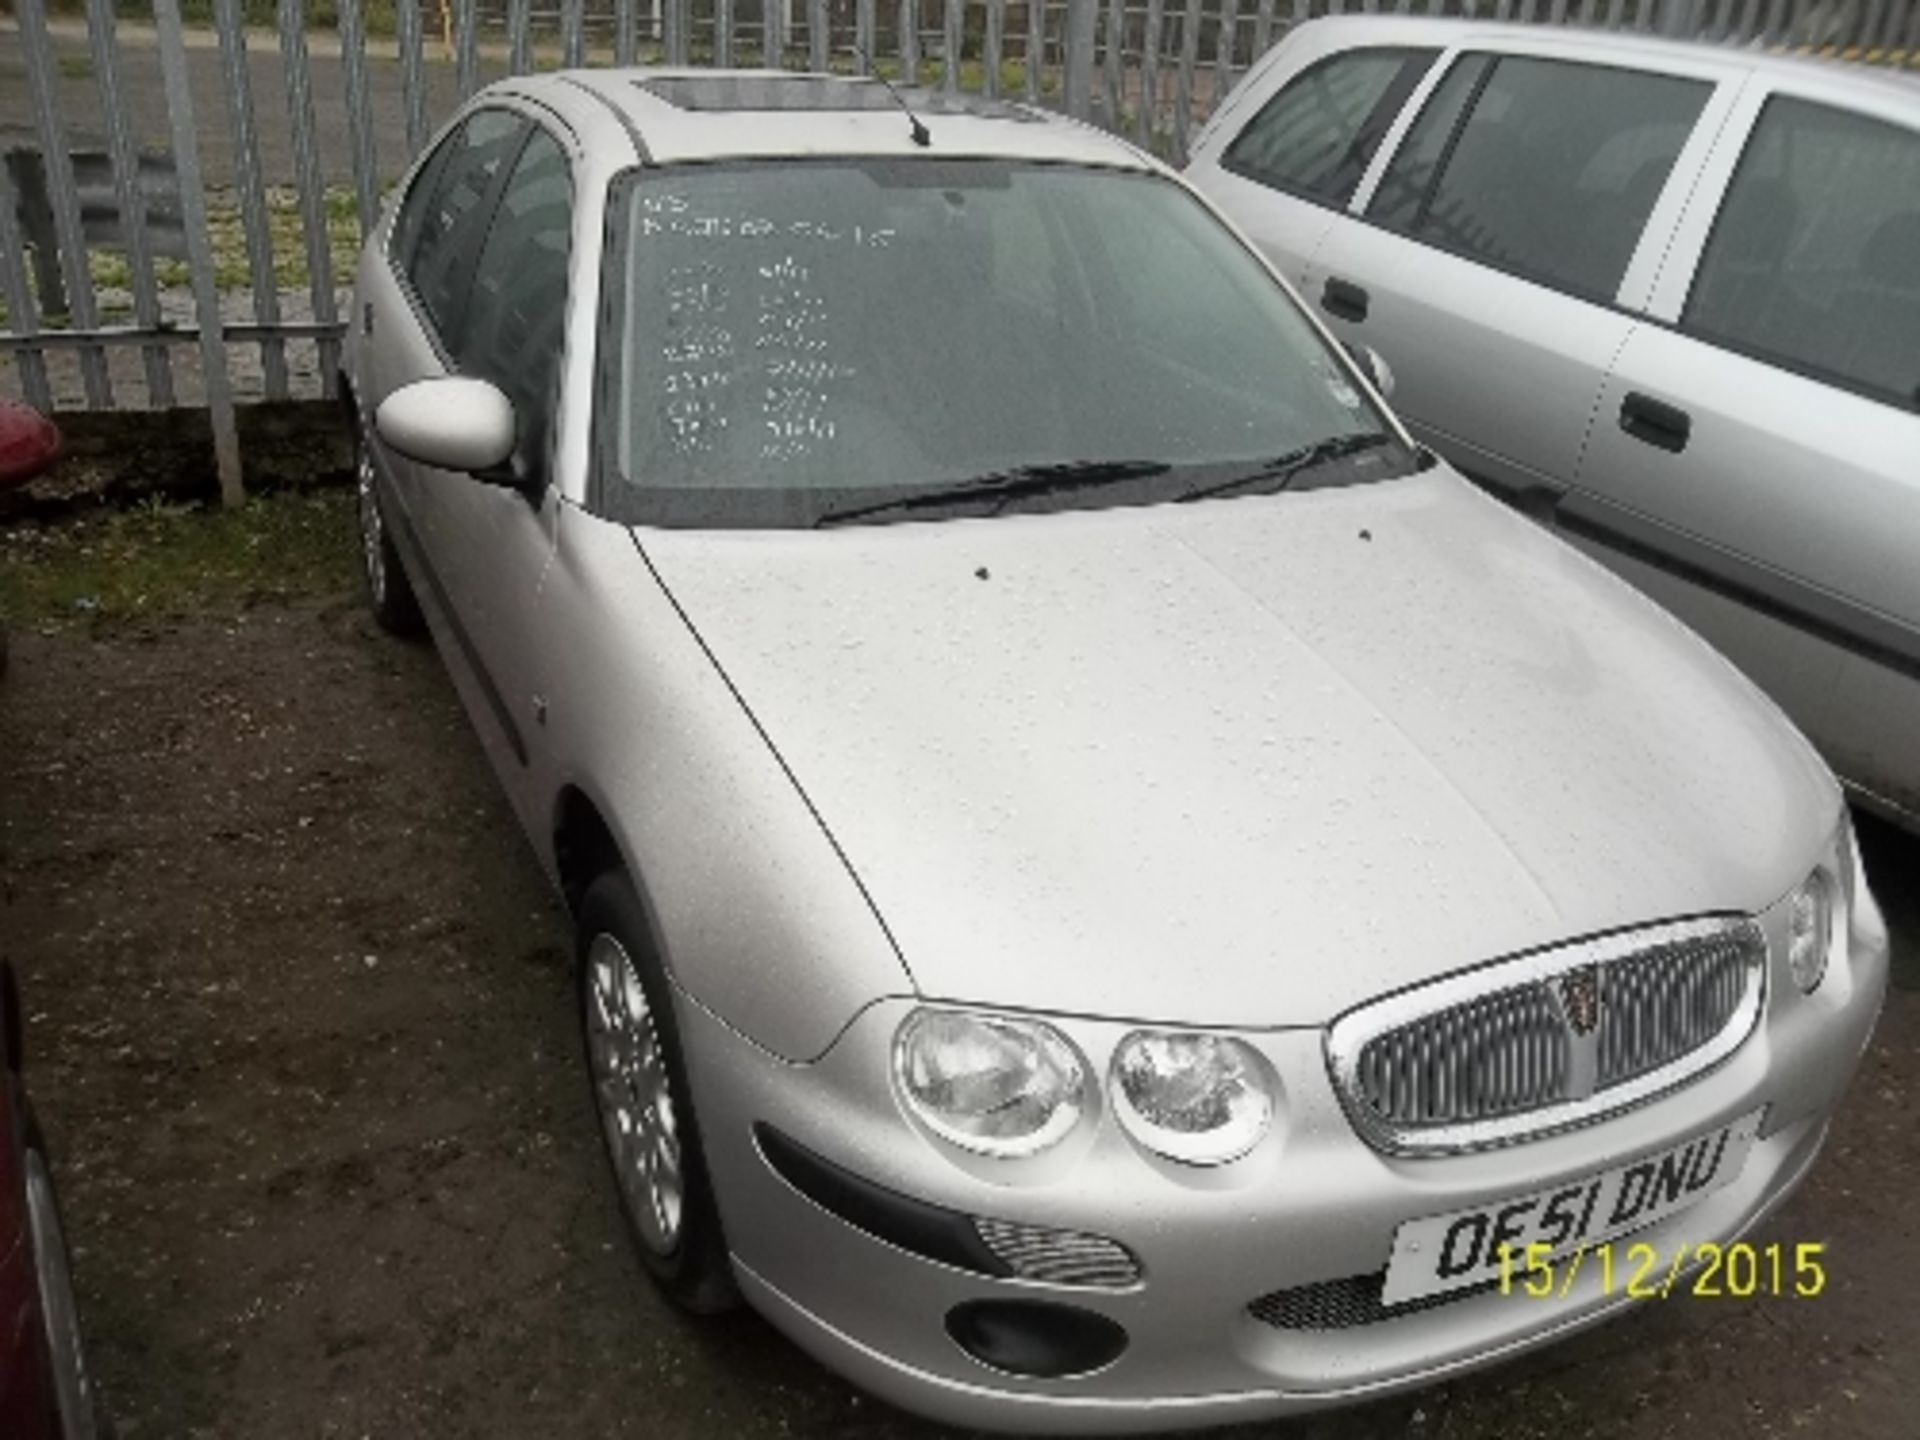 Rover 25 IXL Stepspeed - OE51 DNU Date of registration:  21.12.2001 1588cc, petrol, variable speed - Image 2 of 4